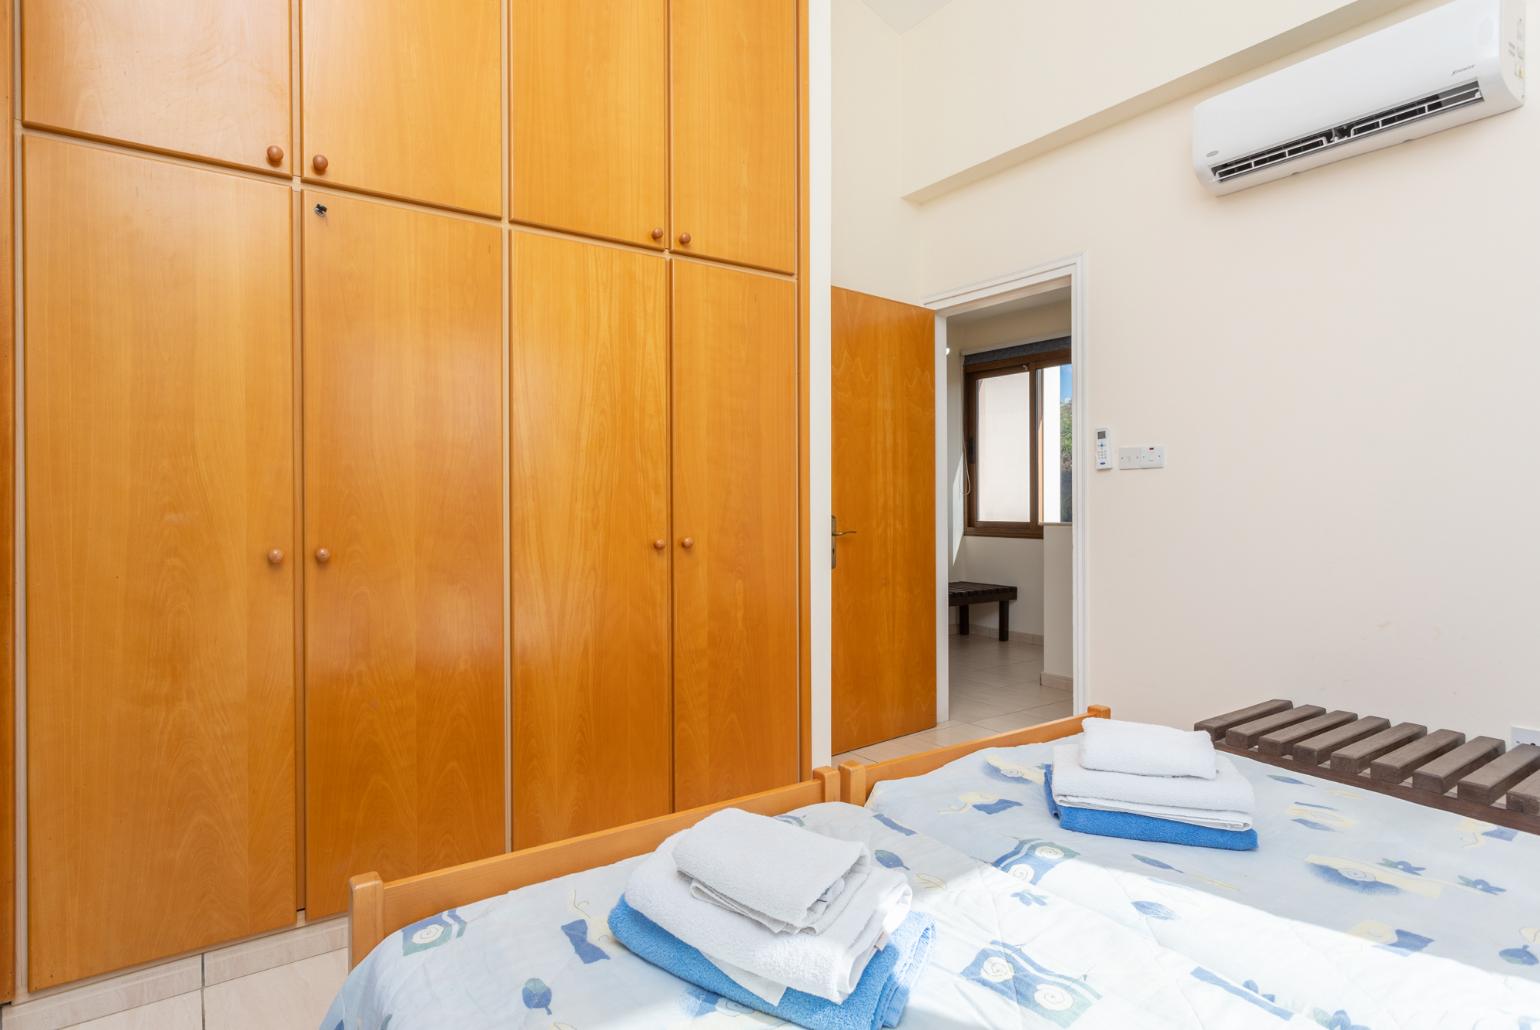 Twin bedroom with with A/C, sea views, and balcony access